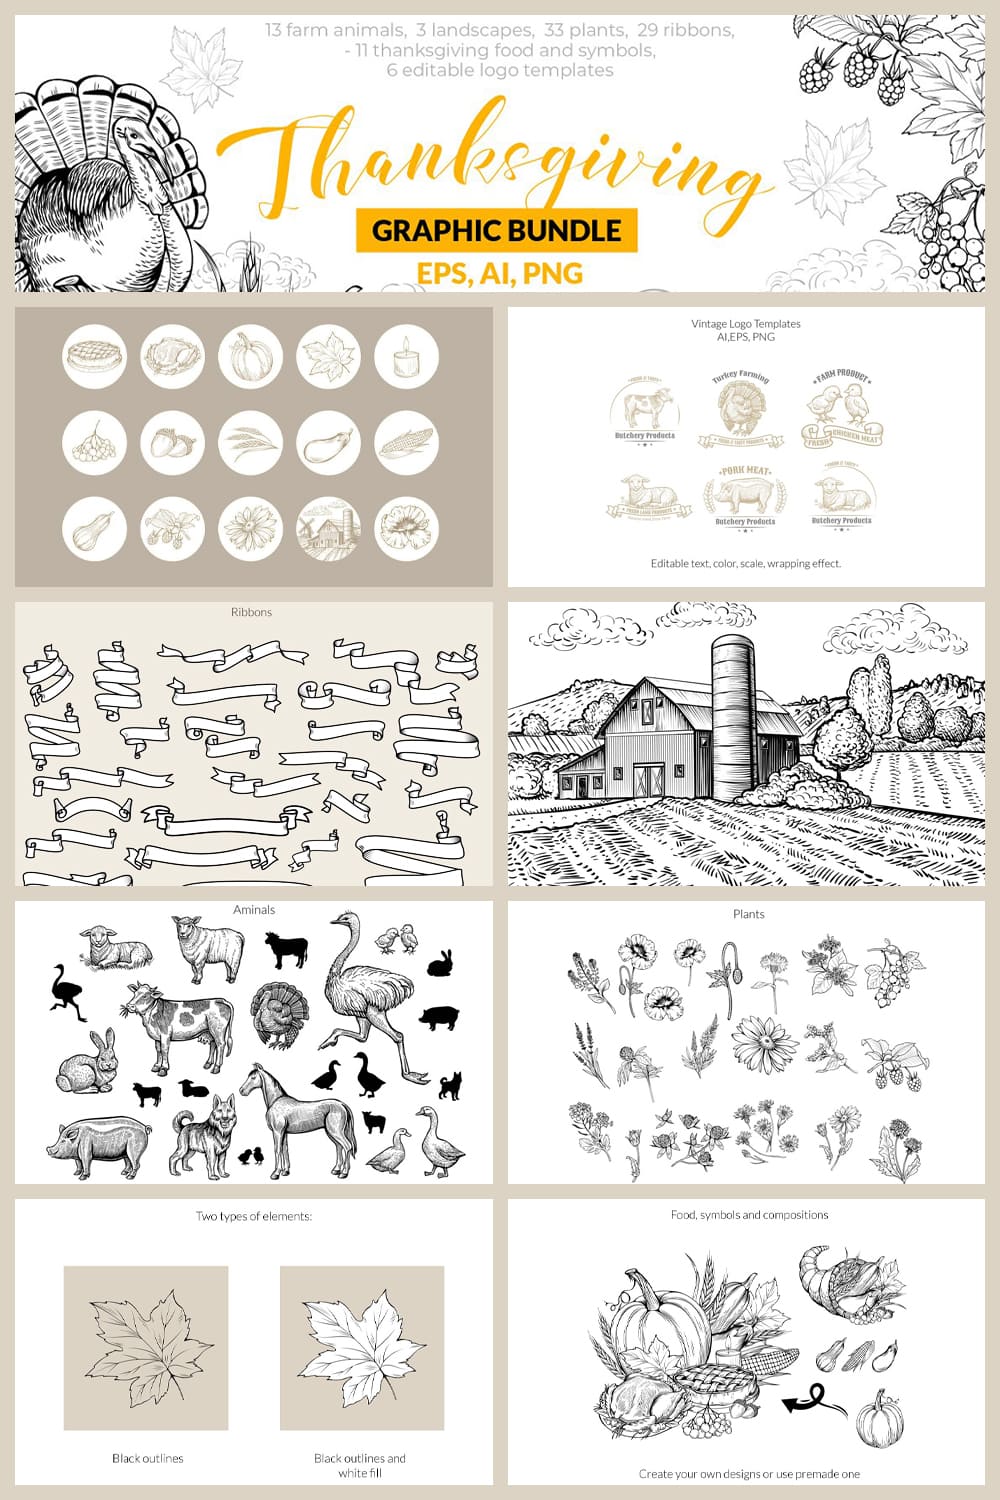 the bundle of thanksgiving graphics pinterest 1000 1500 2